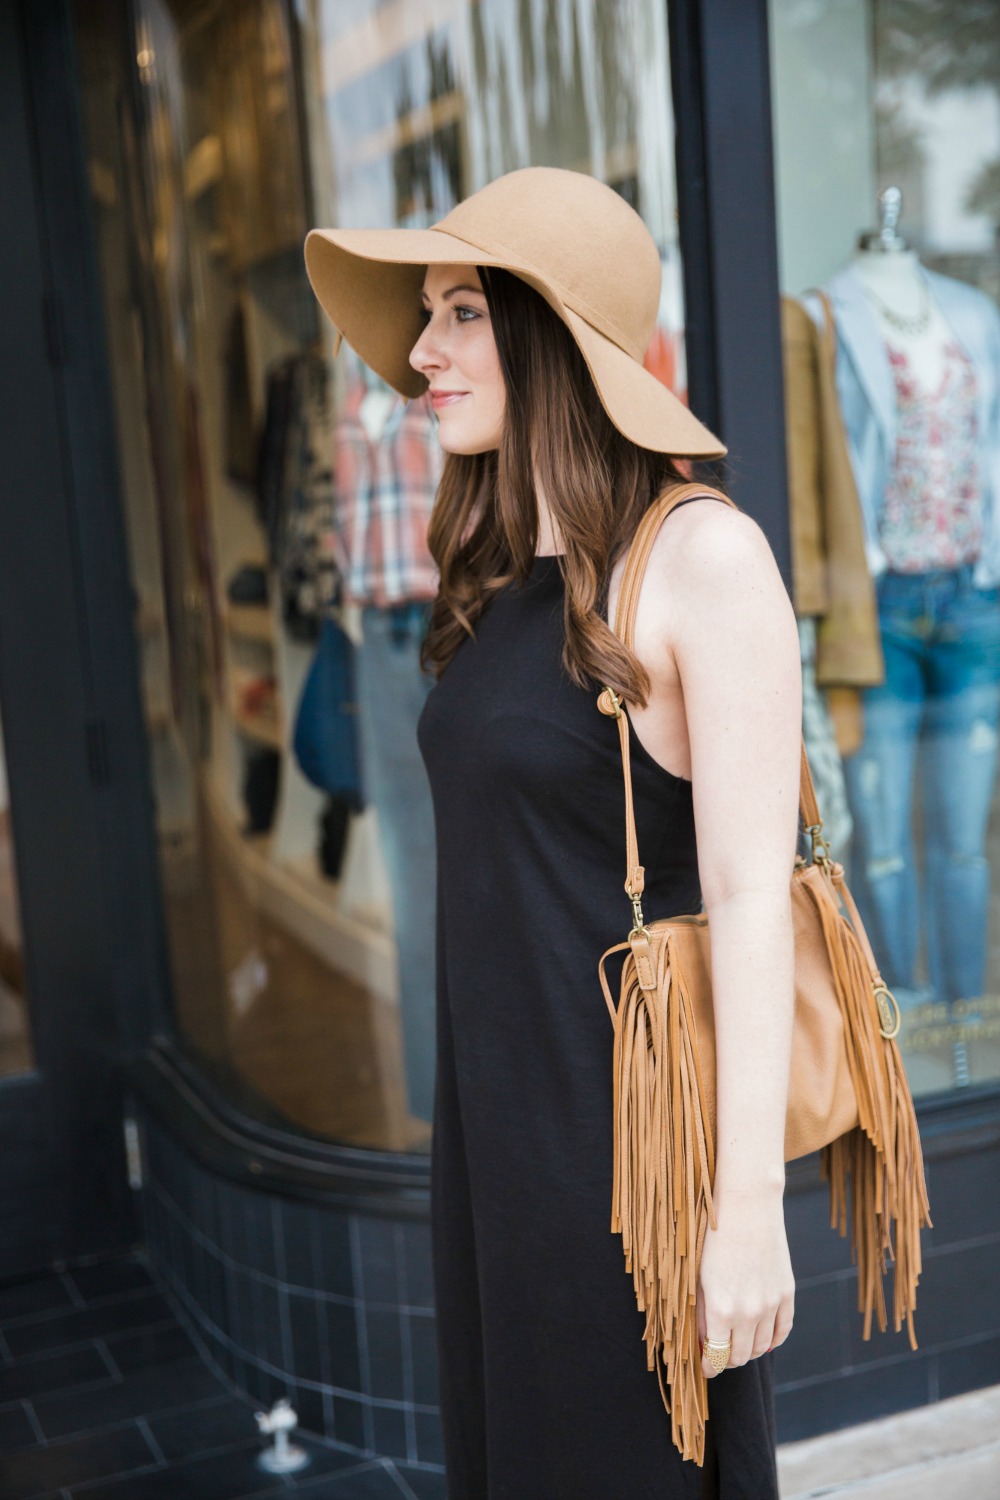 Black casual dress with fringe bag, perfect for a shopping look. 